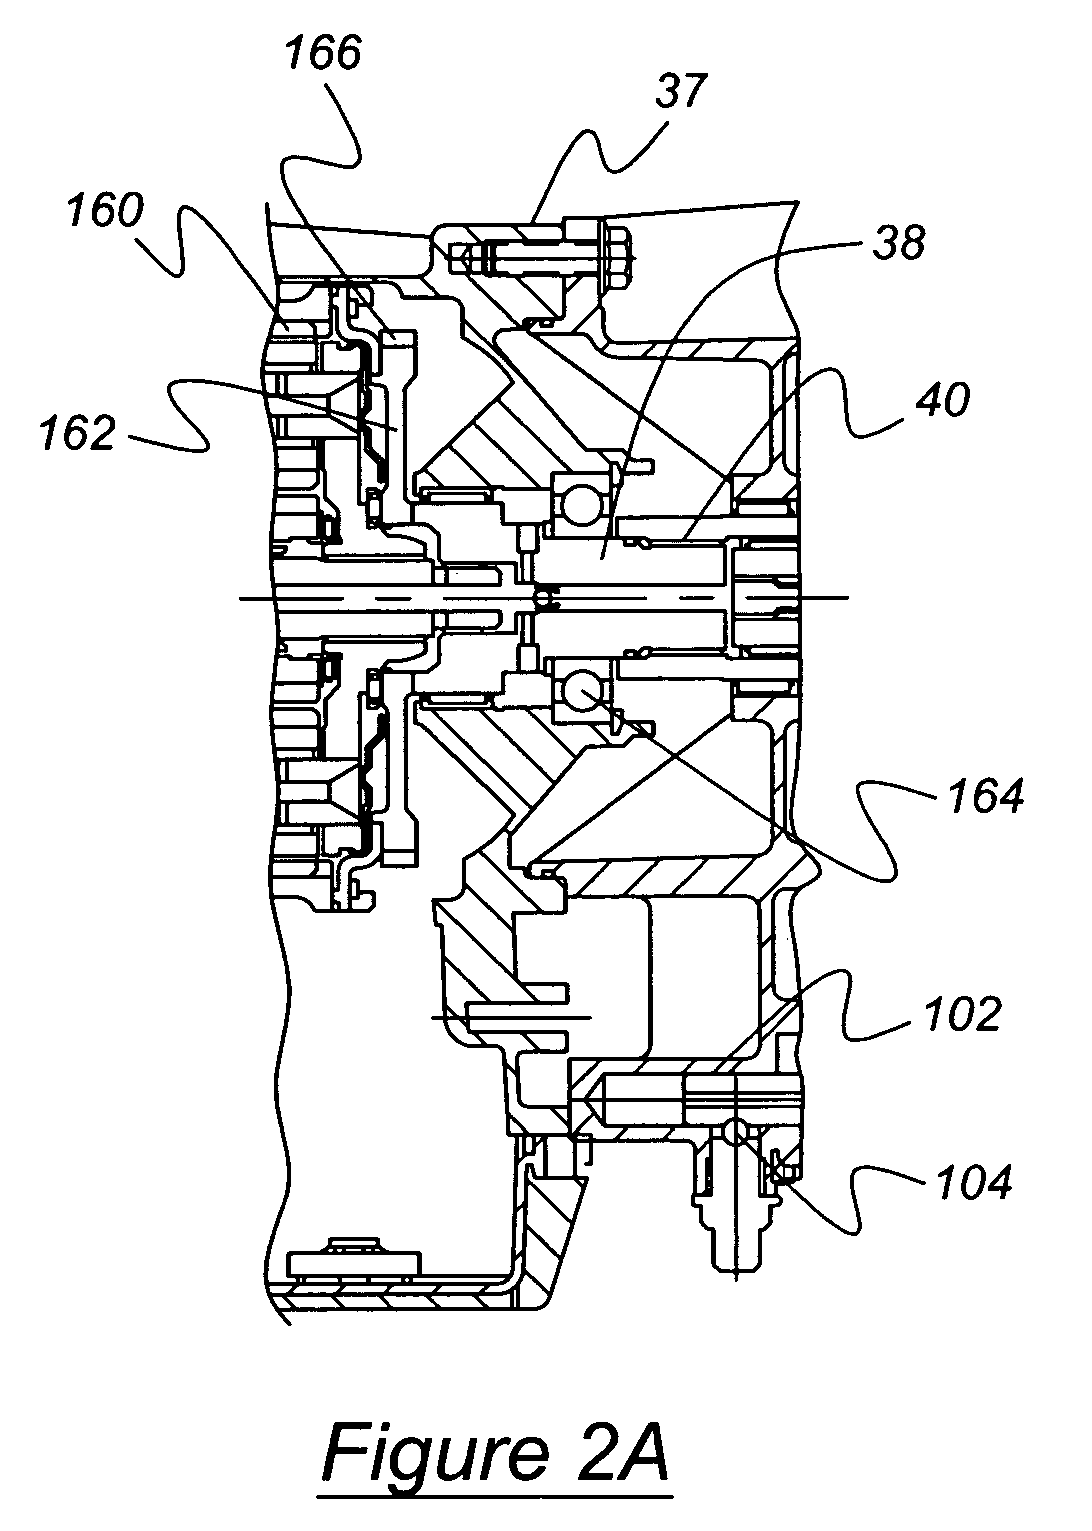 Method and system for controlling a transfer case clutch to protect against excessive heat